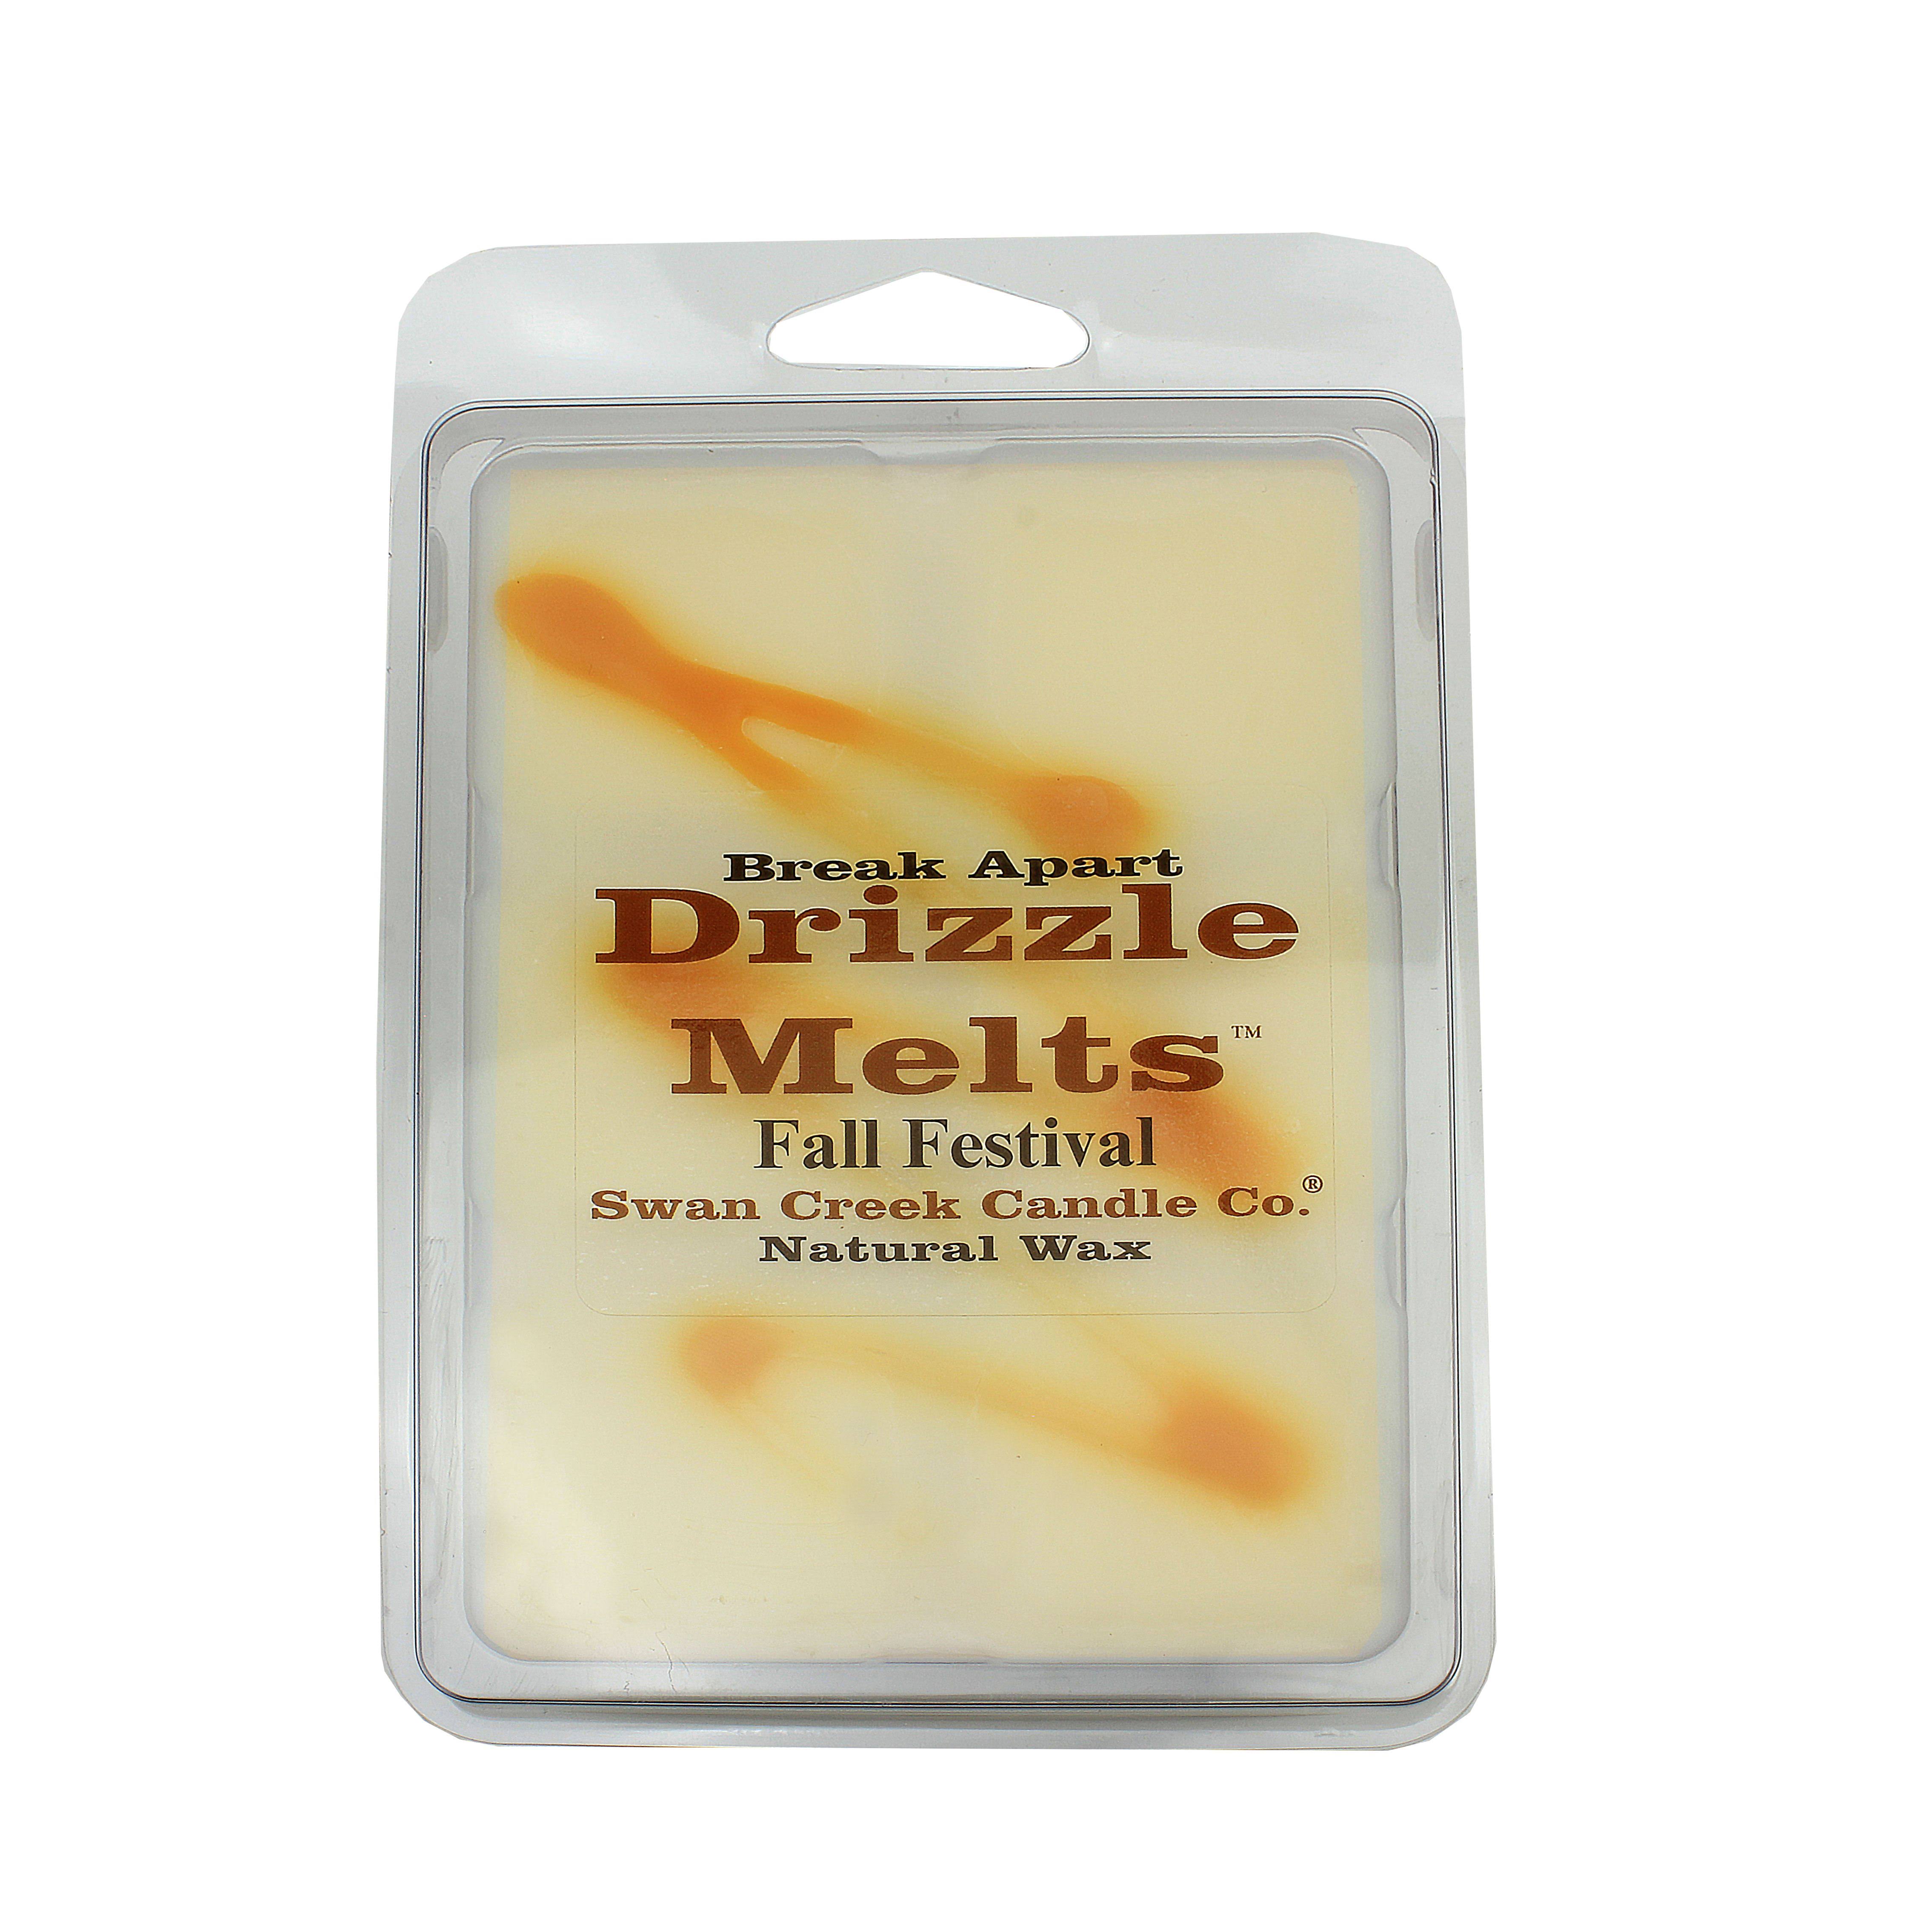 Swan Creek Candle Co. - Drizzle Melts - Fall Festival